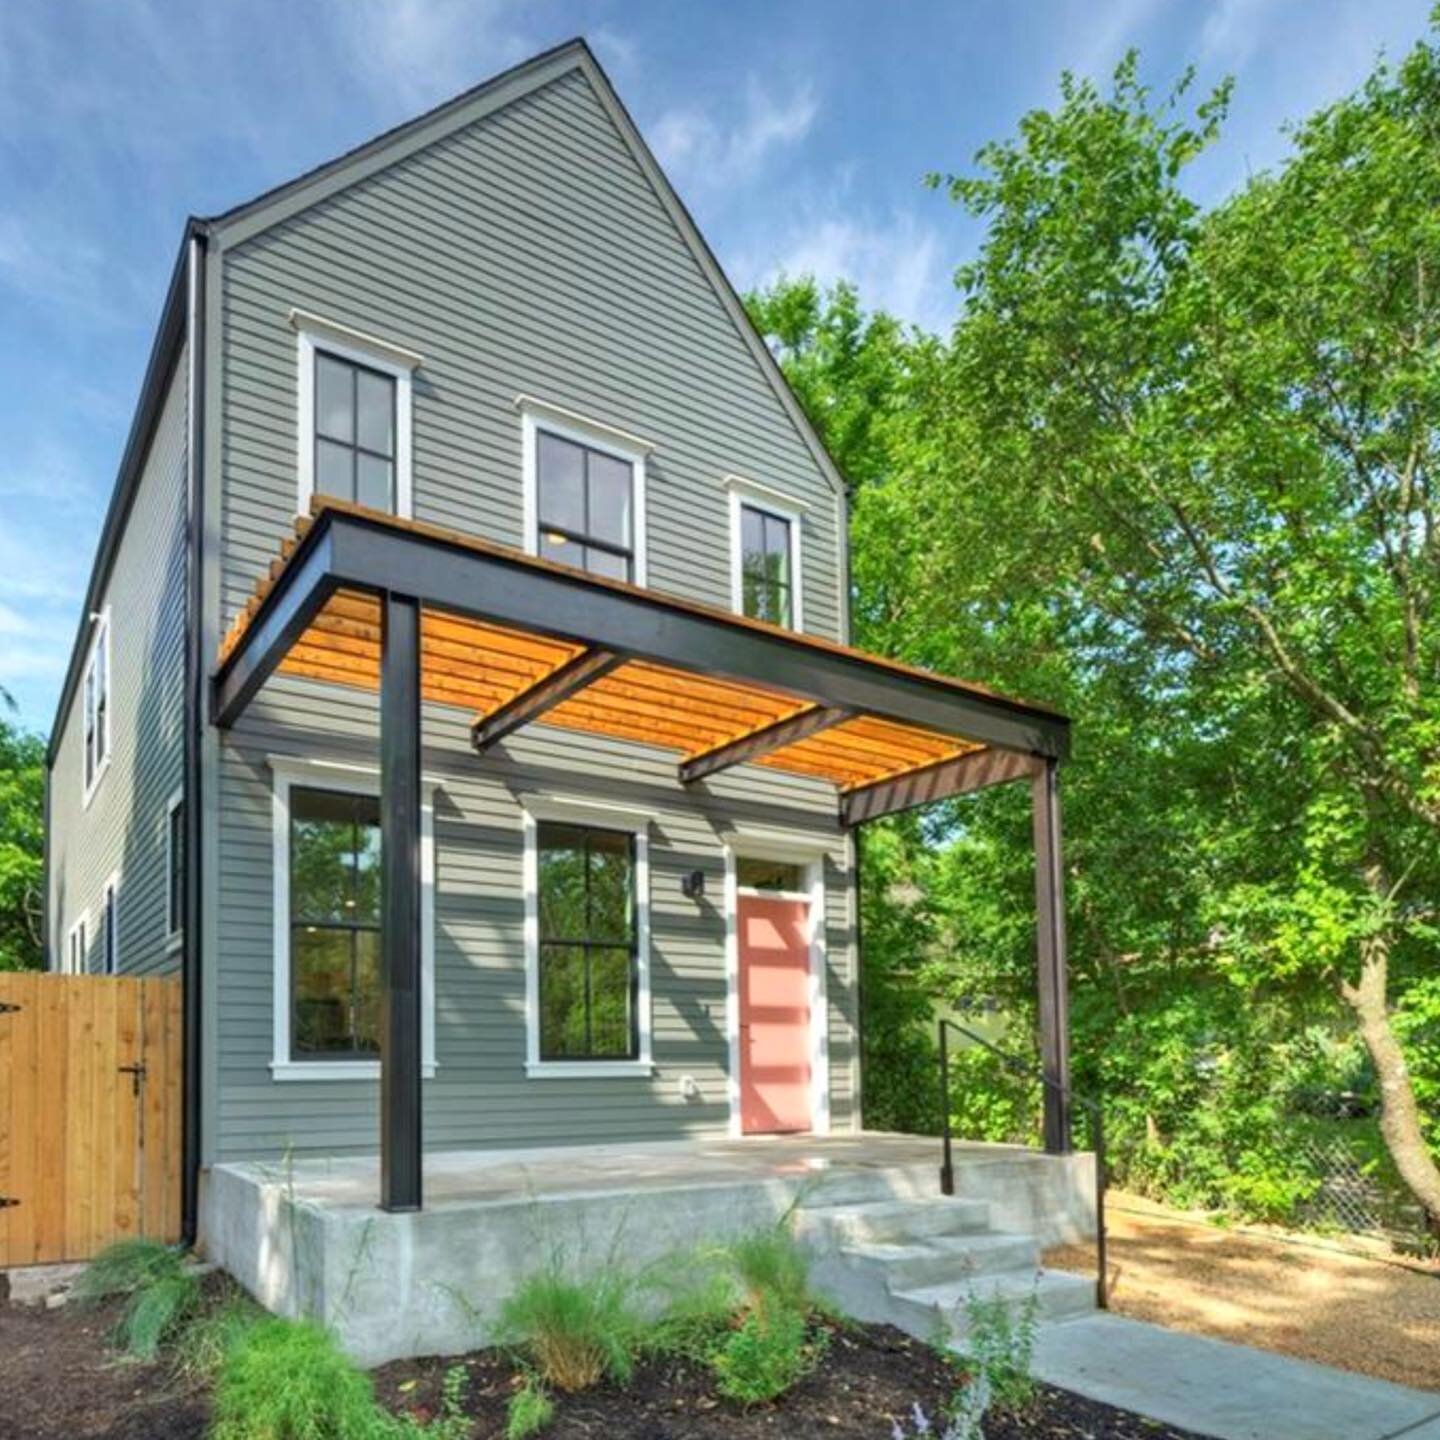 We&rsquo;ve been following this new build on Marlo street in #EastAustin for months now. The finished product is dreamy and ready for its new owner. Well crafted design and construction by Williams-Austin Builders combining classic architecture and m